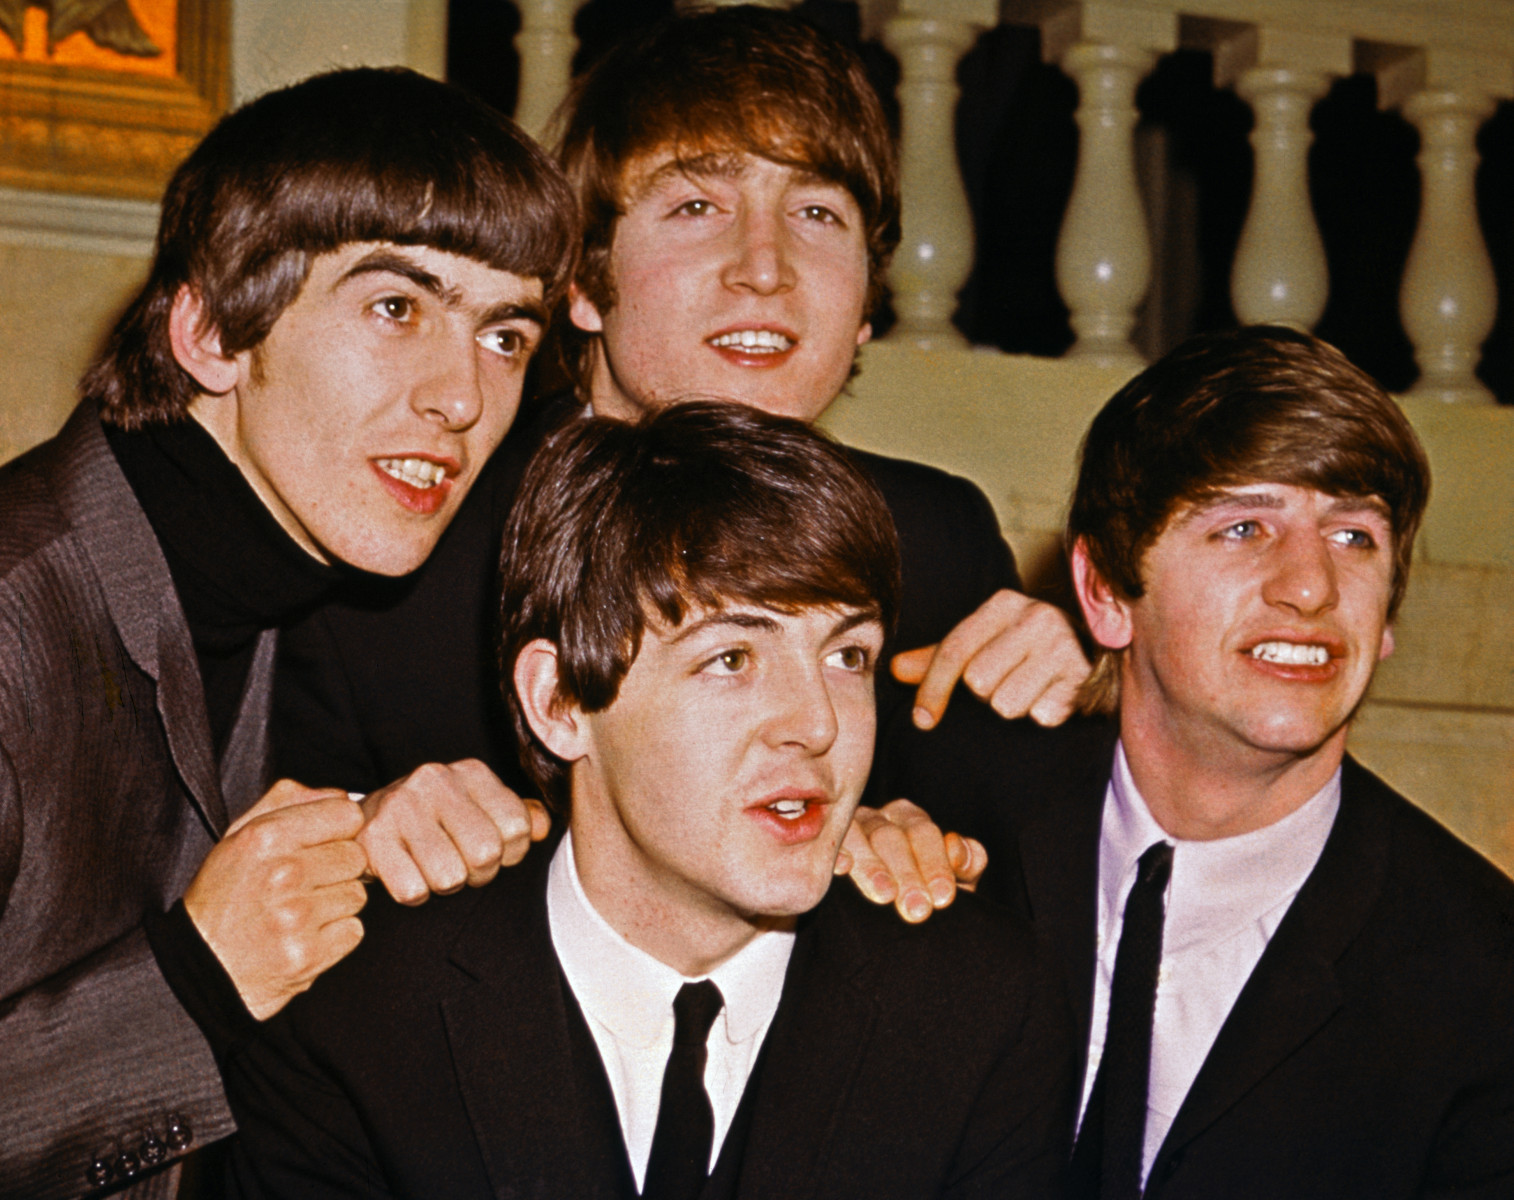 If You Get Over 80% On This General Knowledge Quiz, You’re Way Too Smart The Beatles